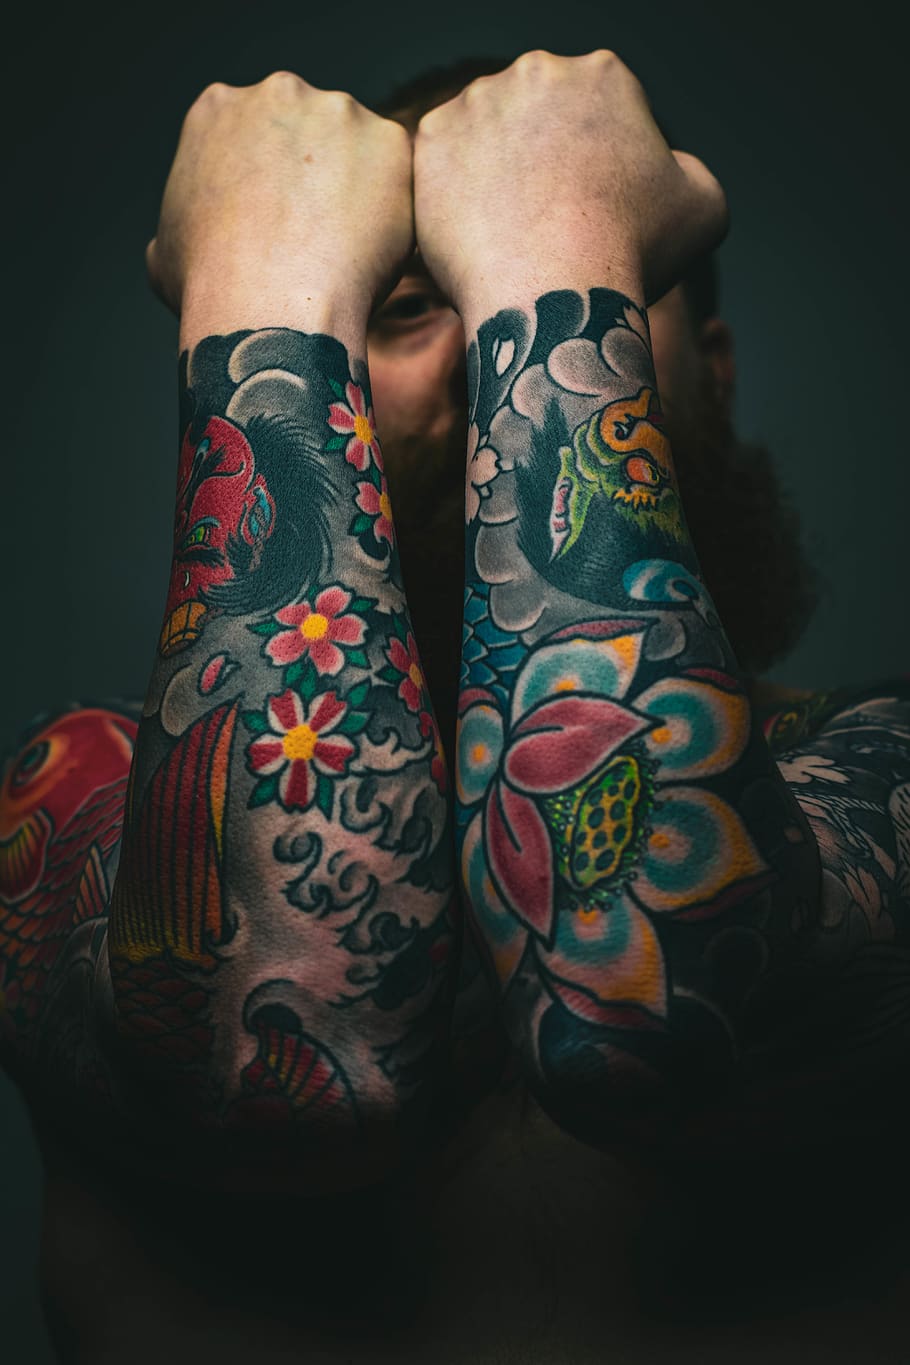 Man With Floral Arm Tattoos`, arms, tattooed, human body part